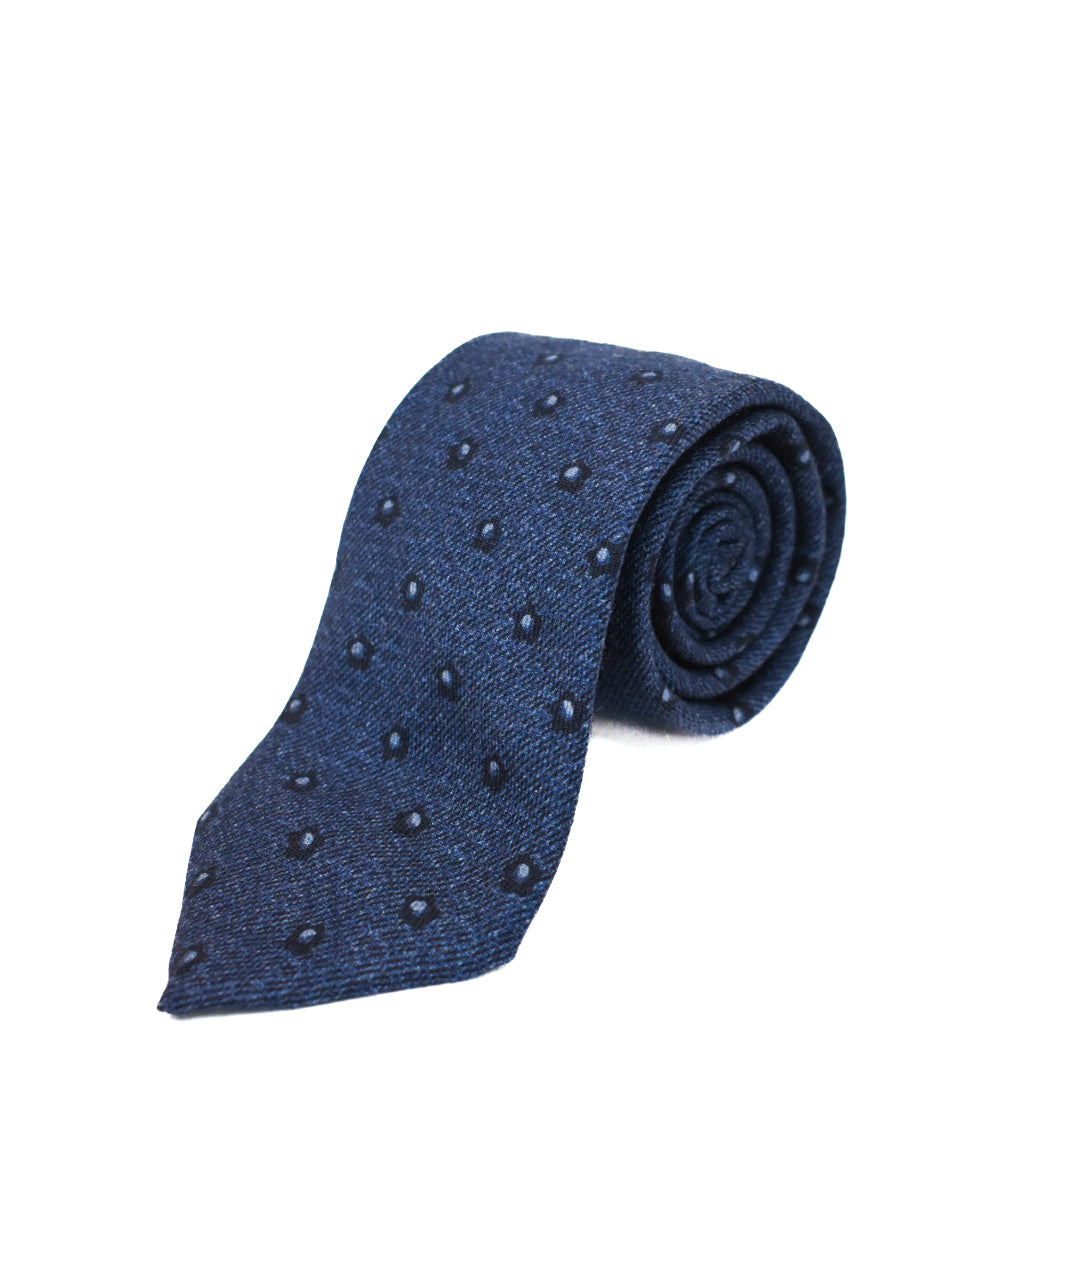 Liam John Two Blues Dotted Tie